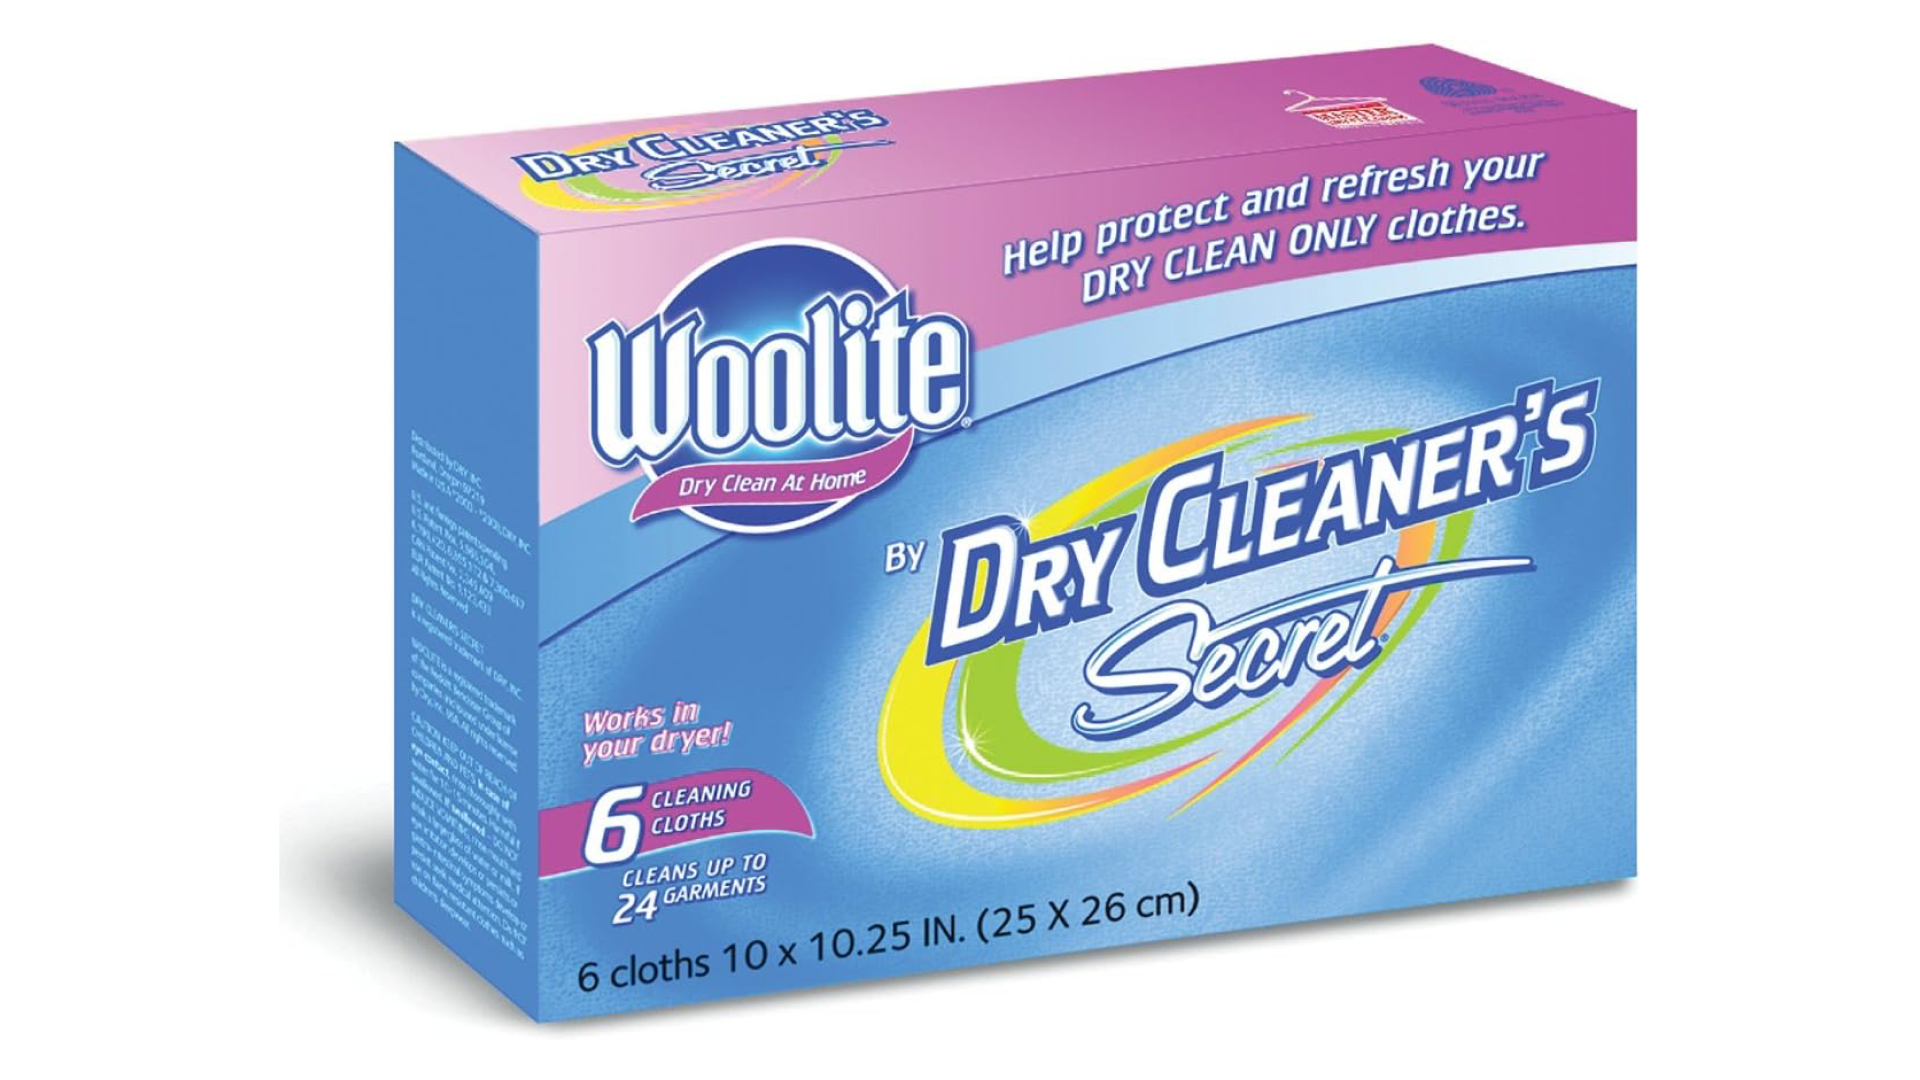 19 Lazy Cleaning Products for When You Just Can't